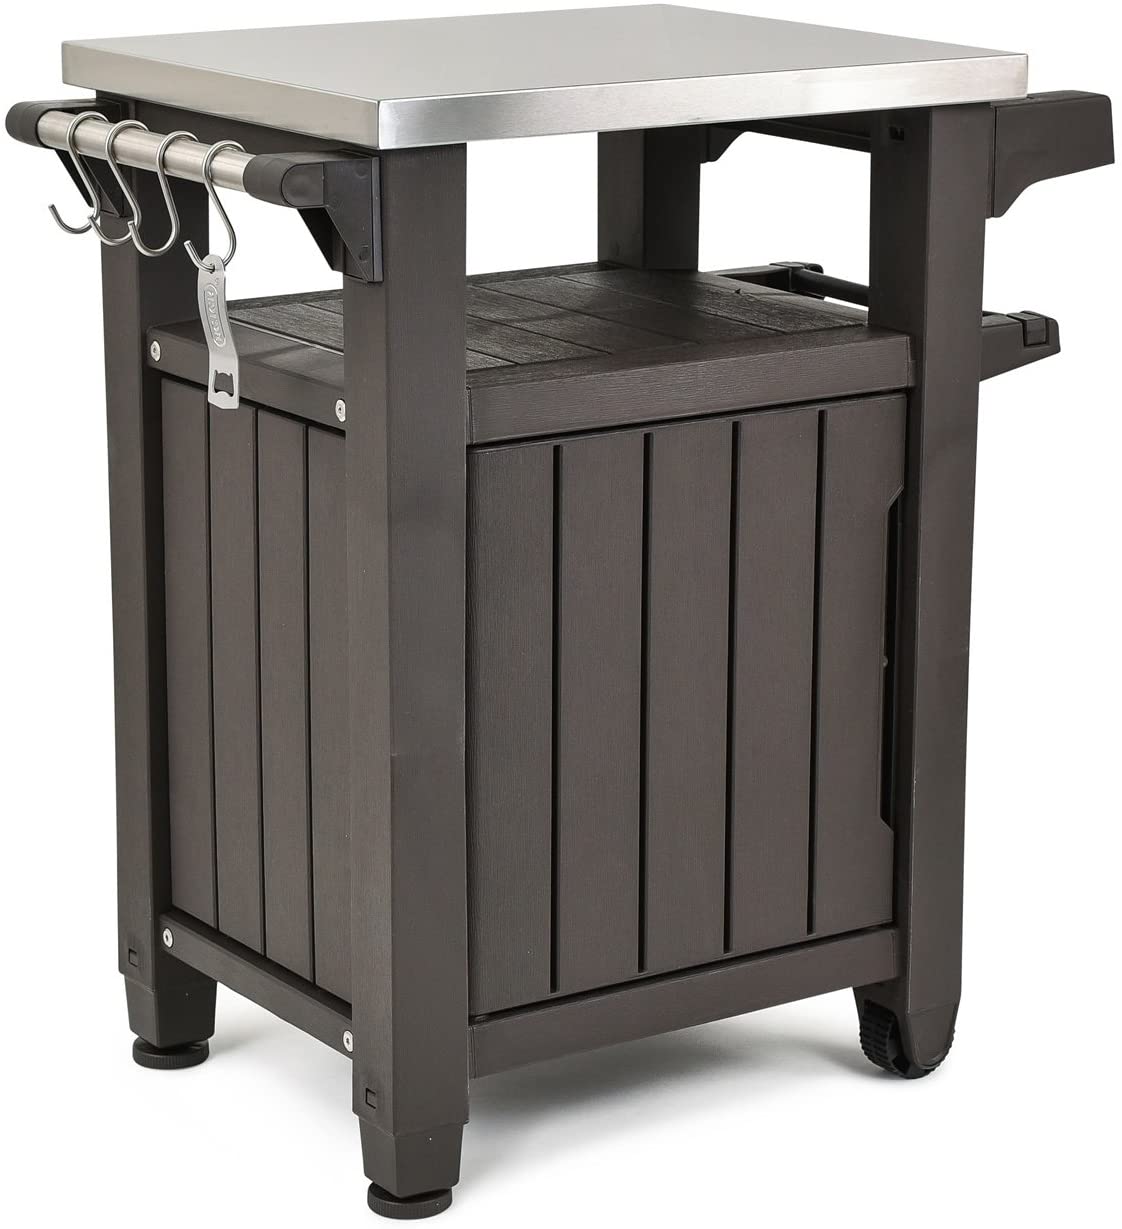 6 Best Grill Tables (Spring 2022) – The Ultimate Guide